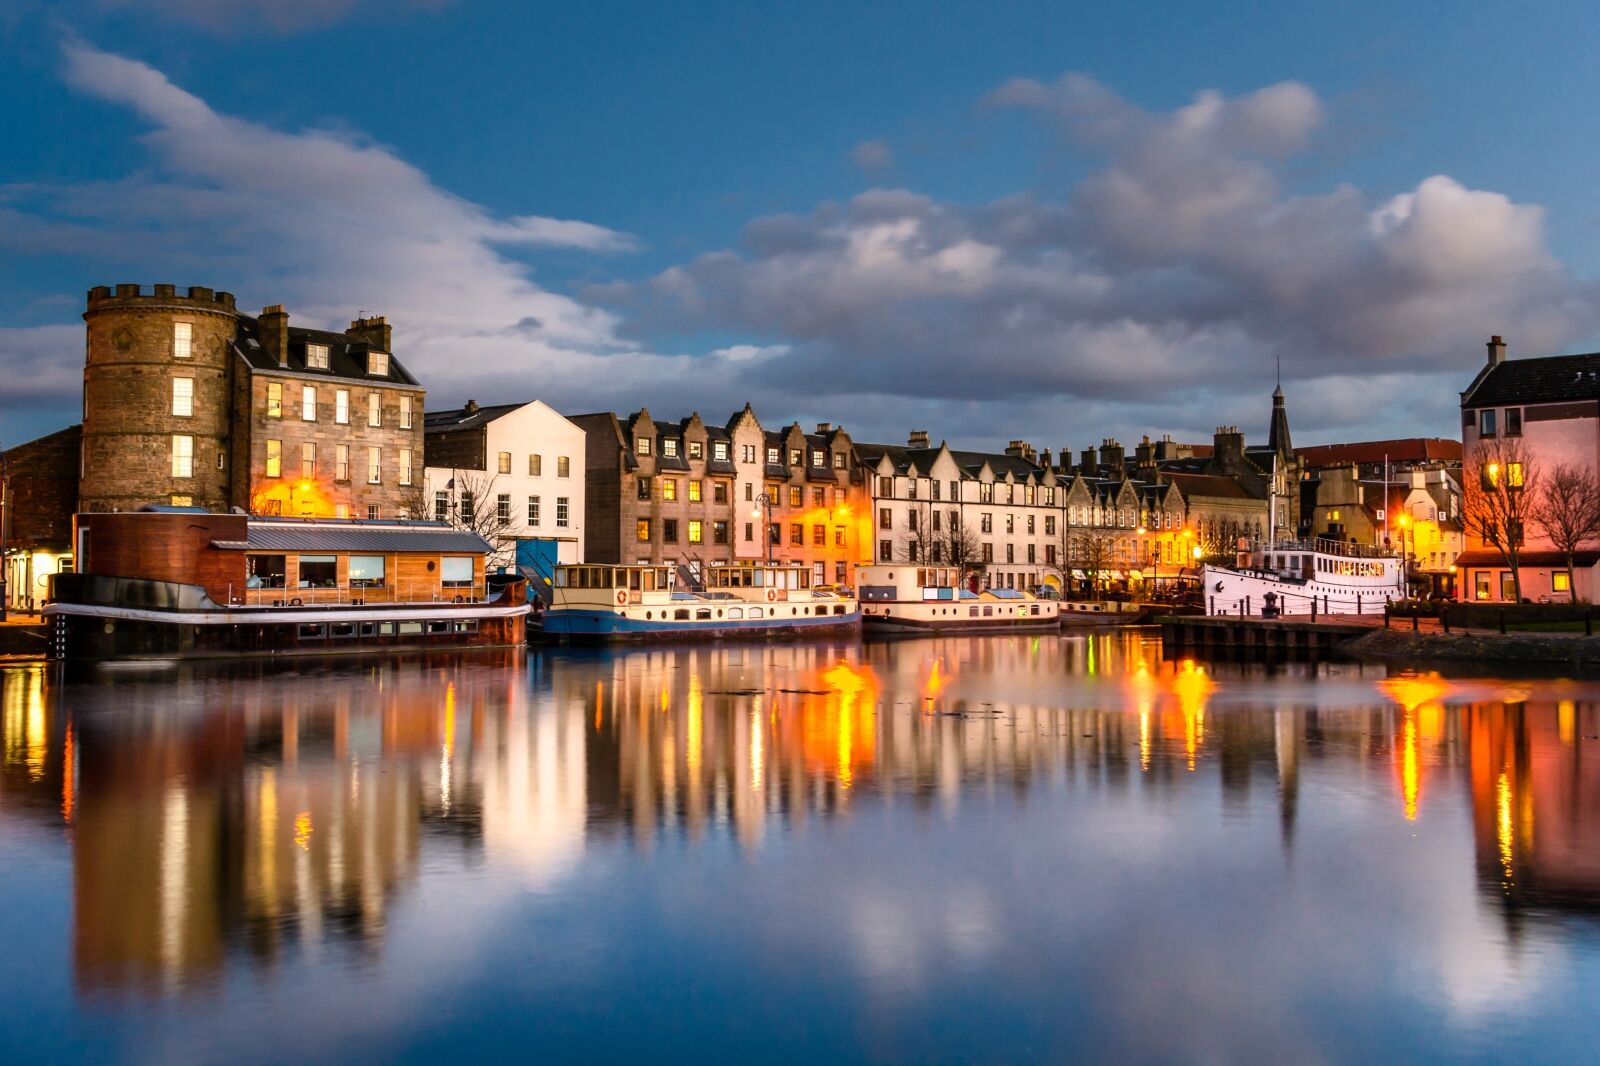 Old Leith Docks at Dusk and Reflection in Water. Edinburgh, Scotland.
